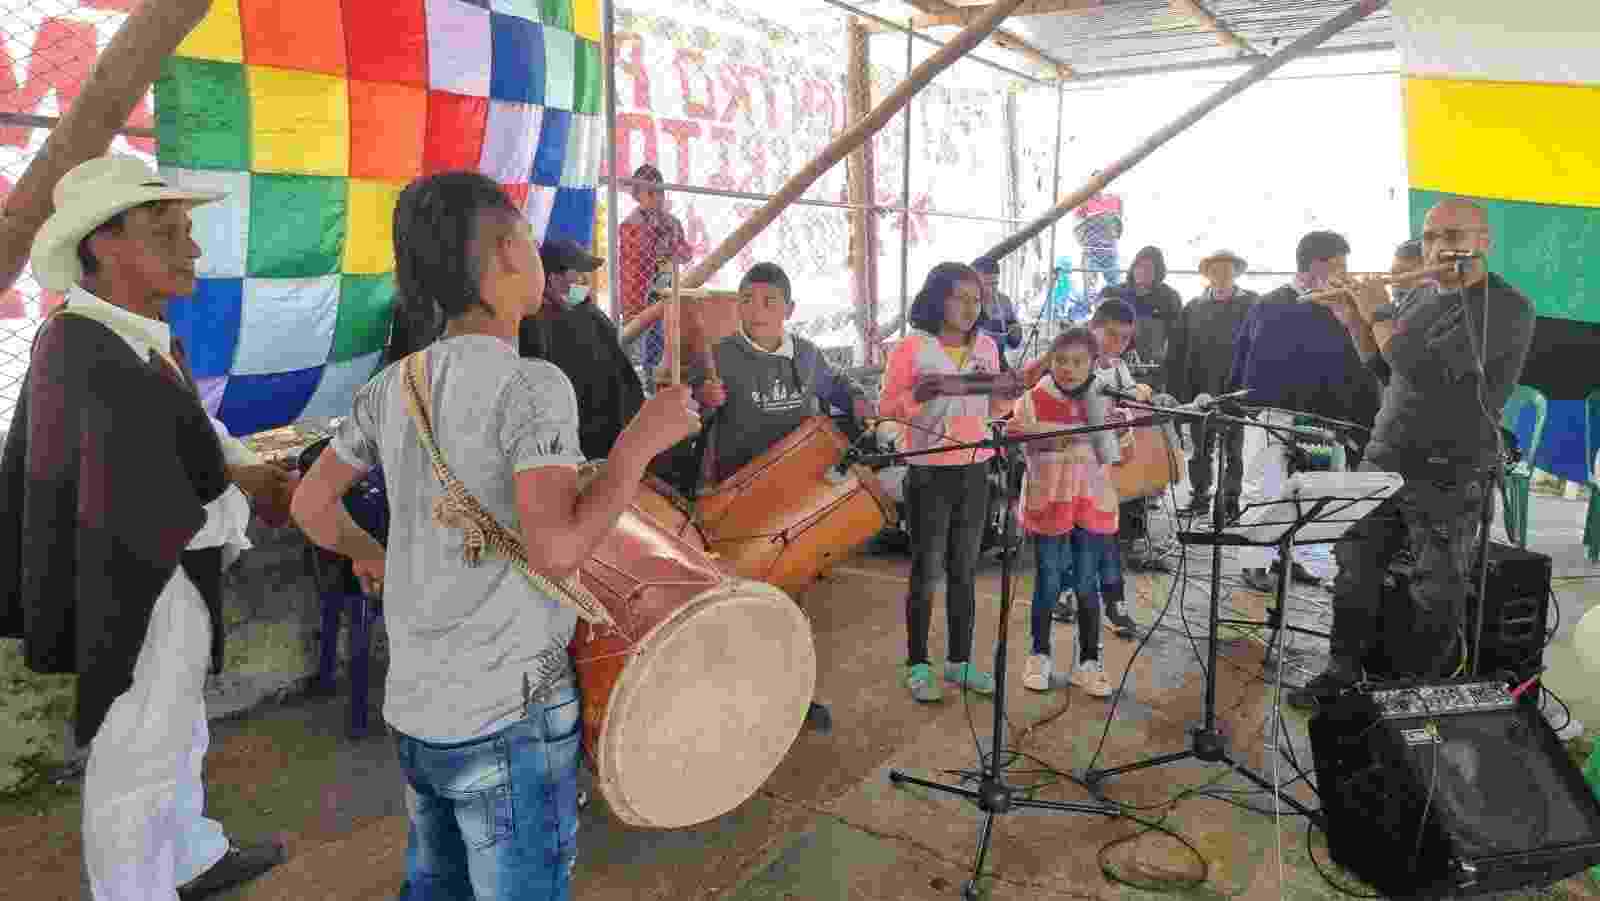 Image shows members of the Kisgó reservation celebrating with music and singing, with brightly coloured decorations